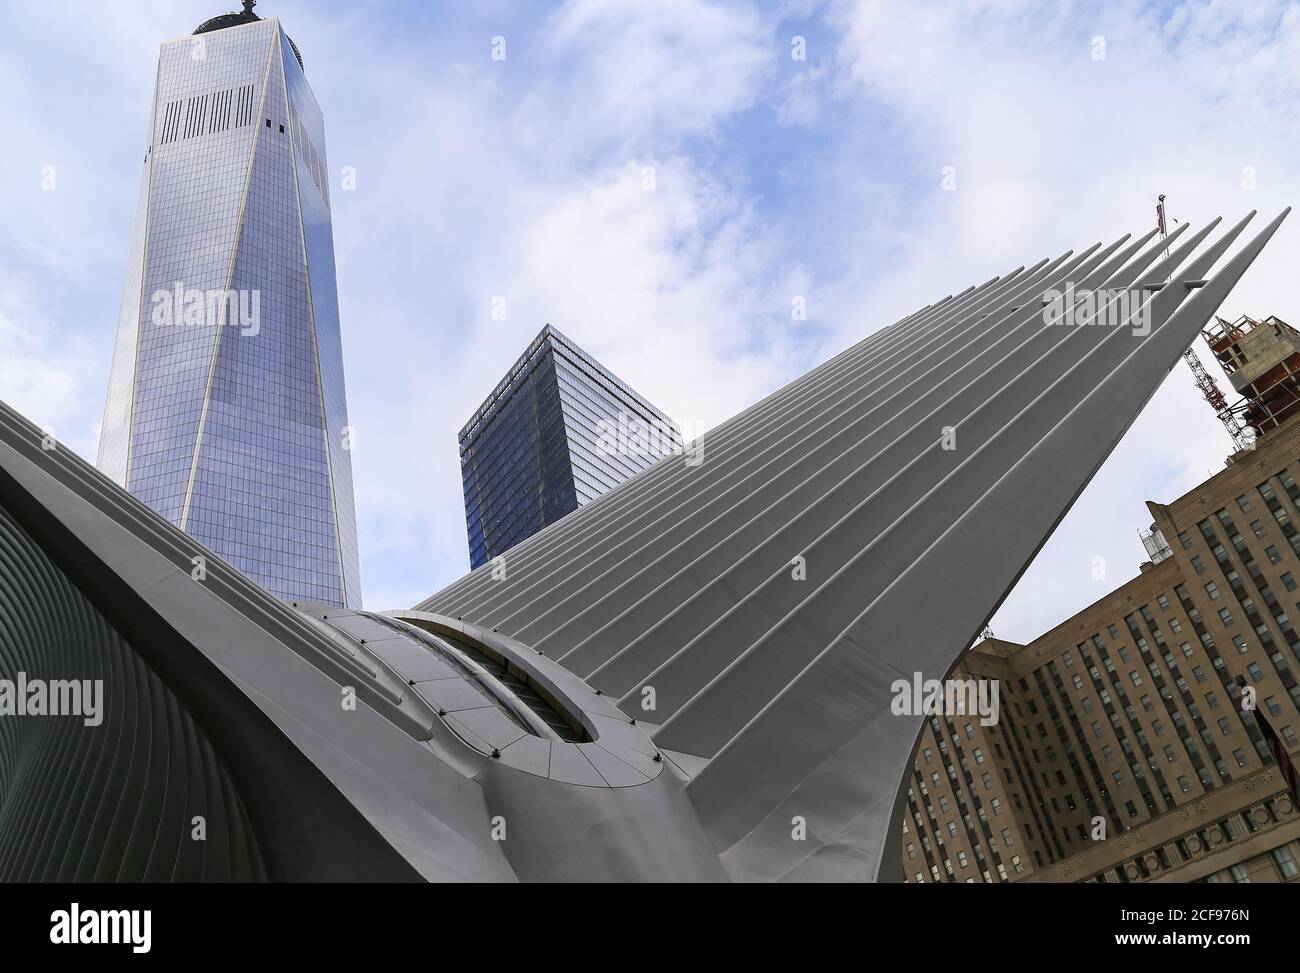 New York City, USA - October 7, 2019: The Oculus Mall outside in Manhattan. The Freedom Tower can be seen in the background. Stock Photo